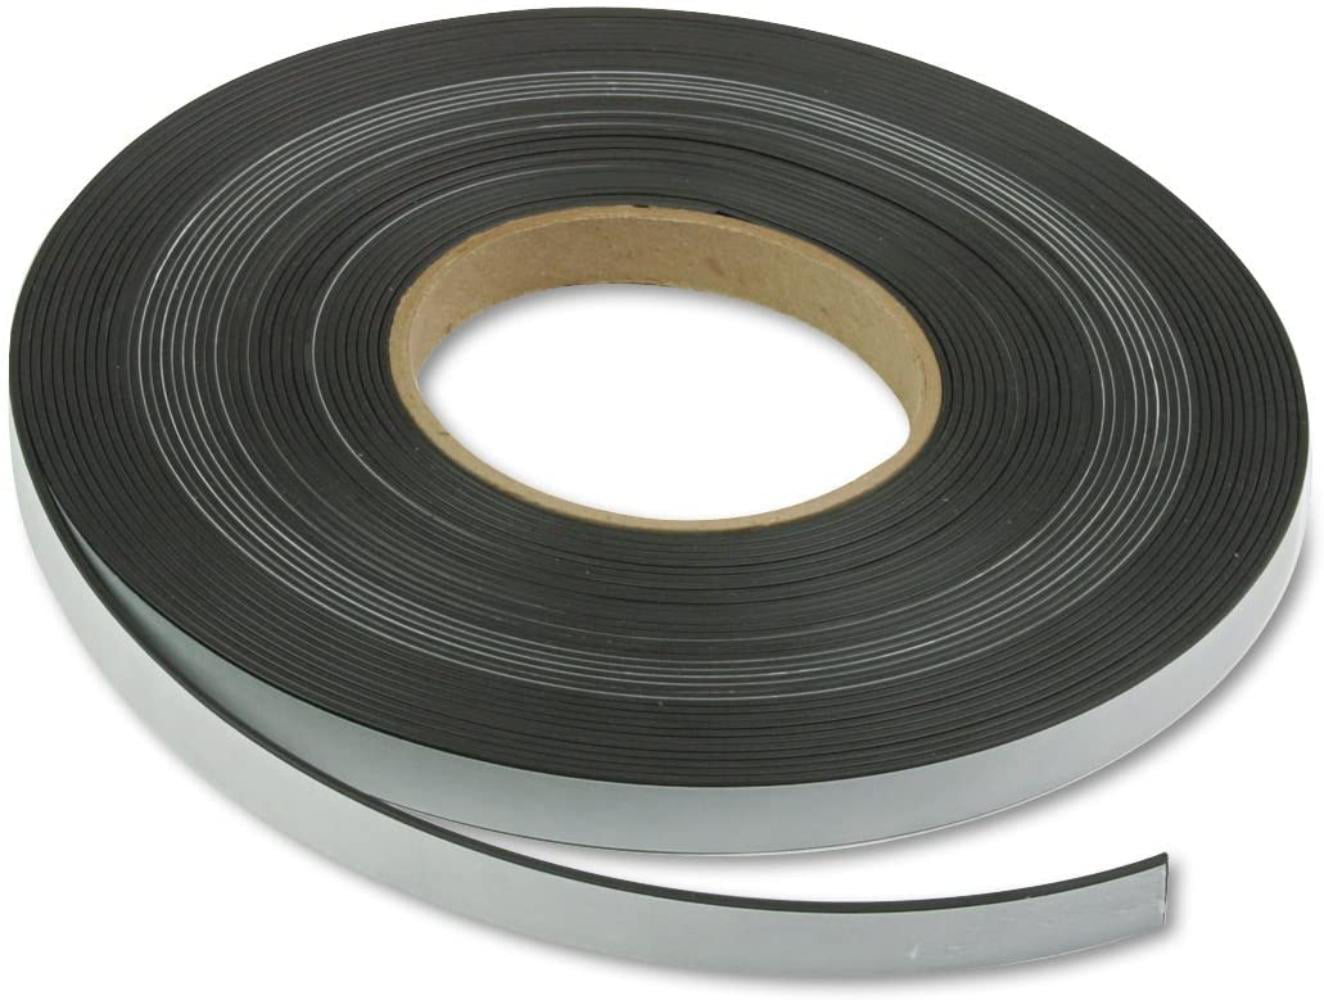 Magna Visual Ct2-b Chart Tape 1/16 in W X 54 FT L Black for sale online 